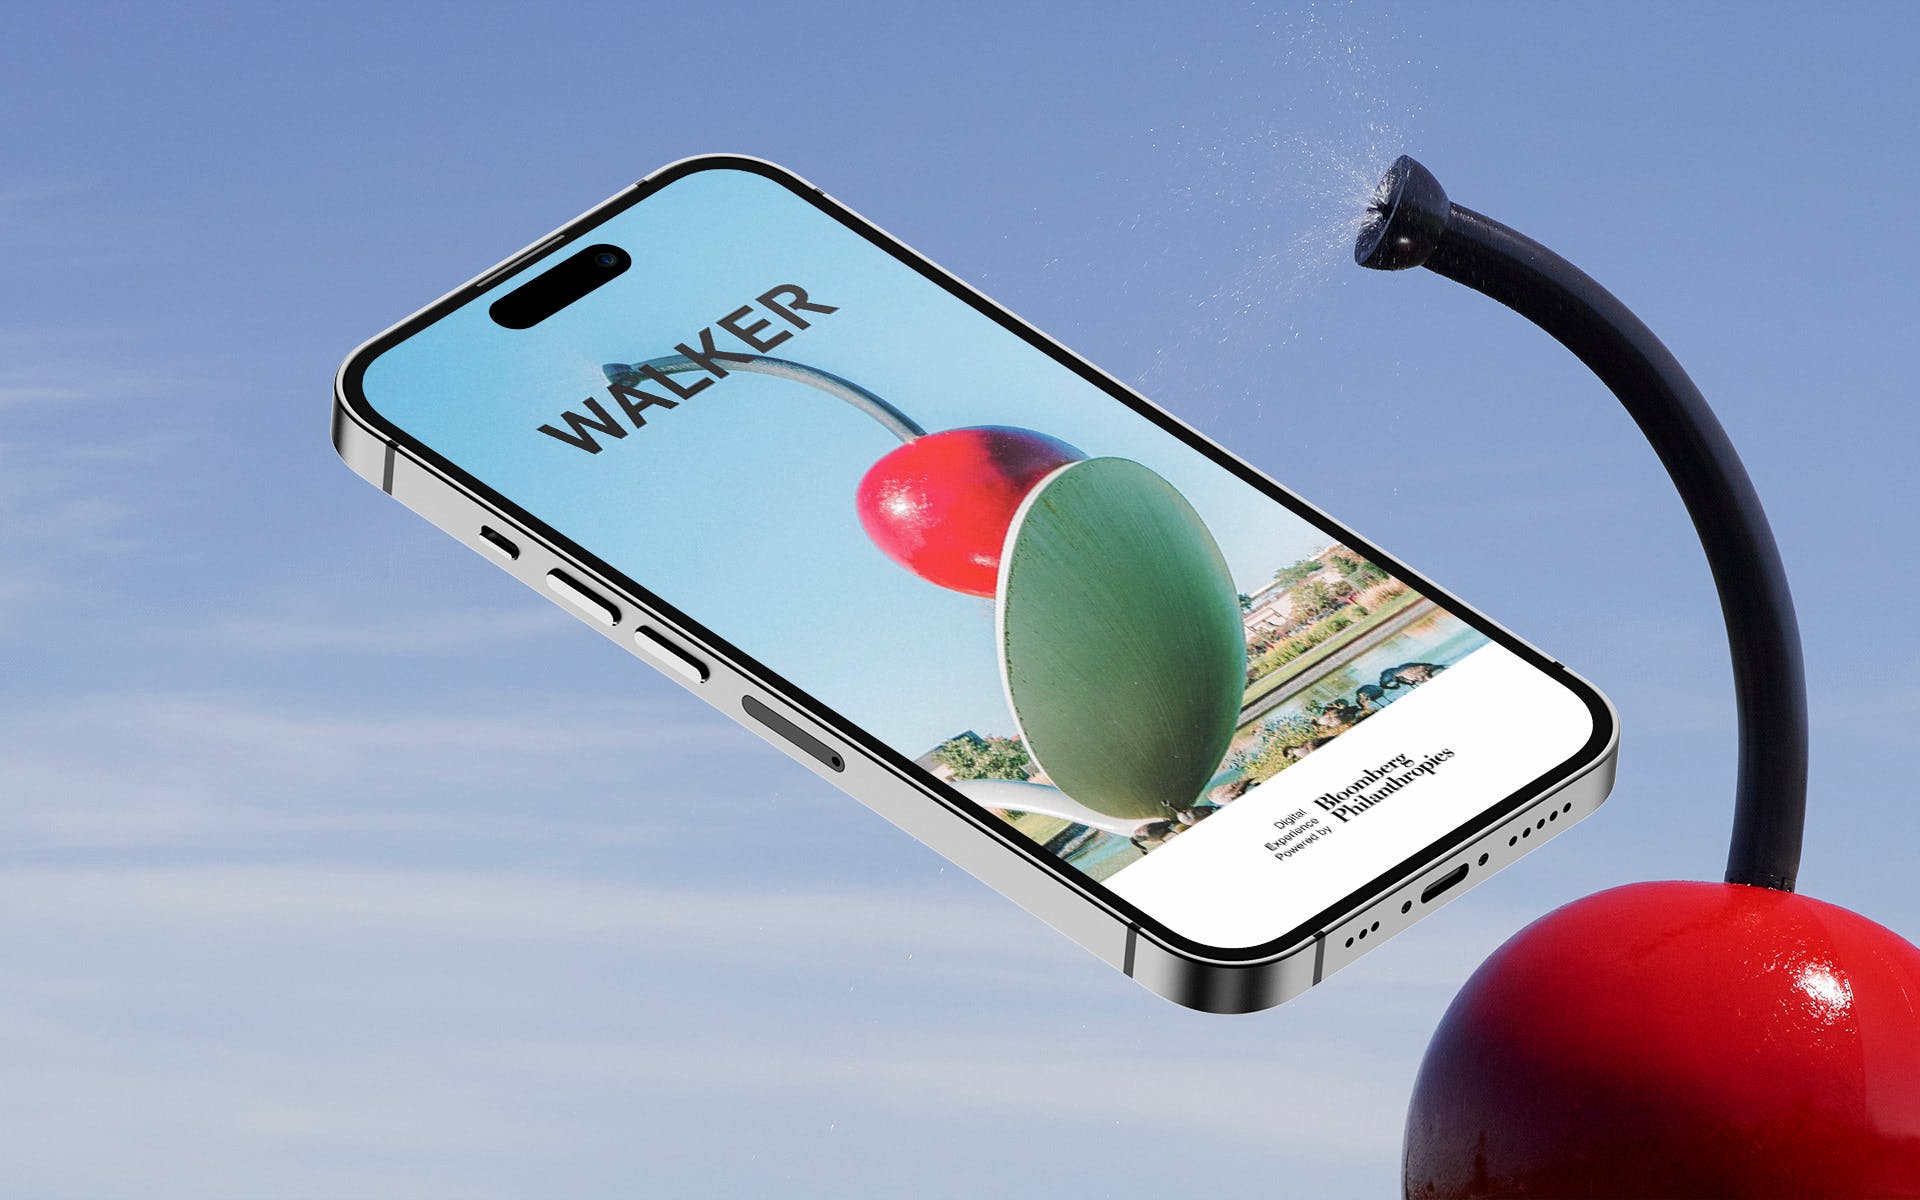 An iphone with an image of a large sculpture of a cherry resting in a spoon floats in the sky.